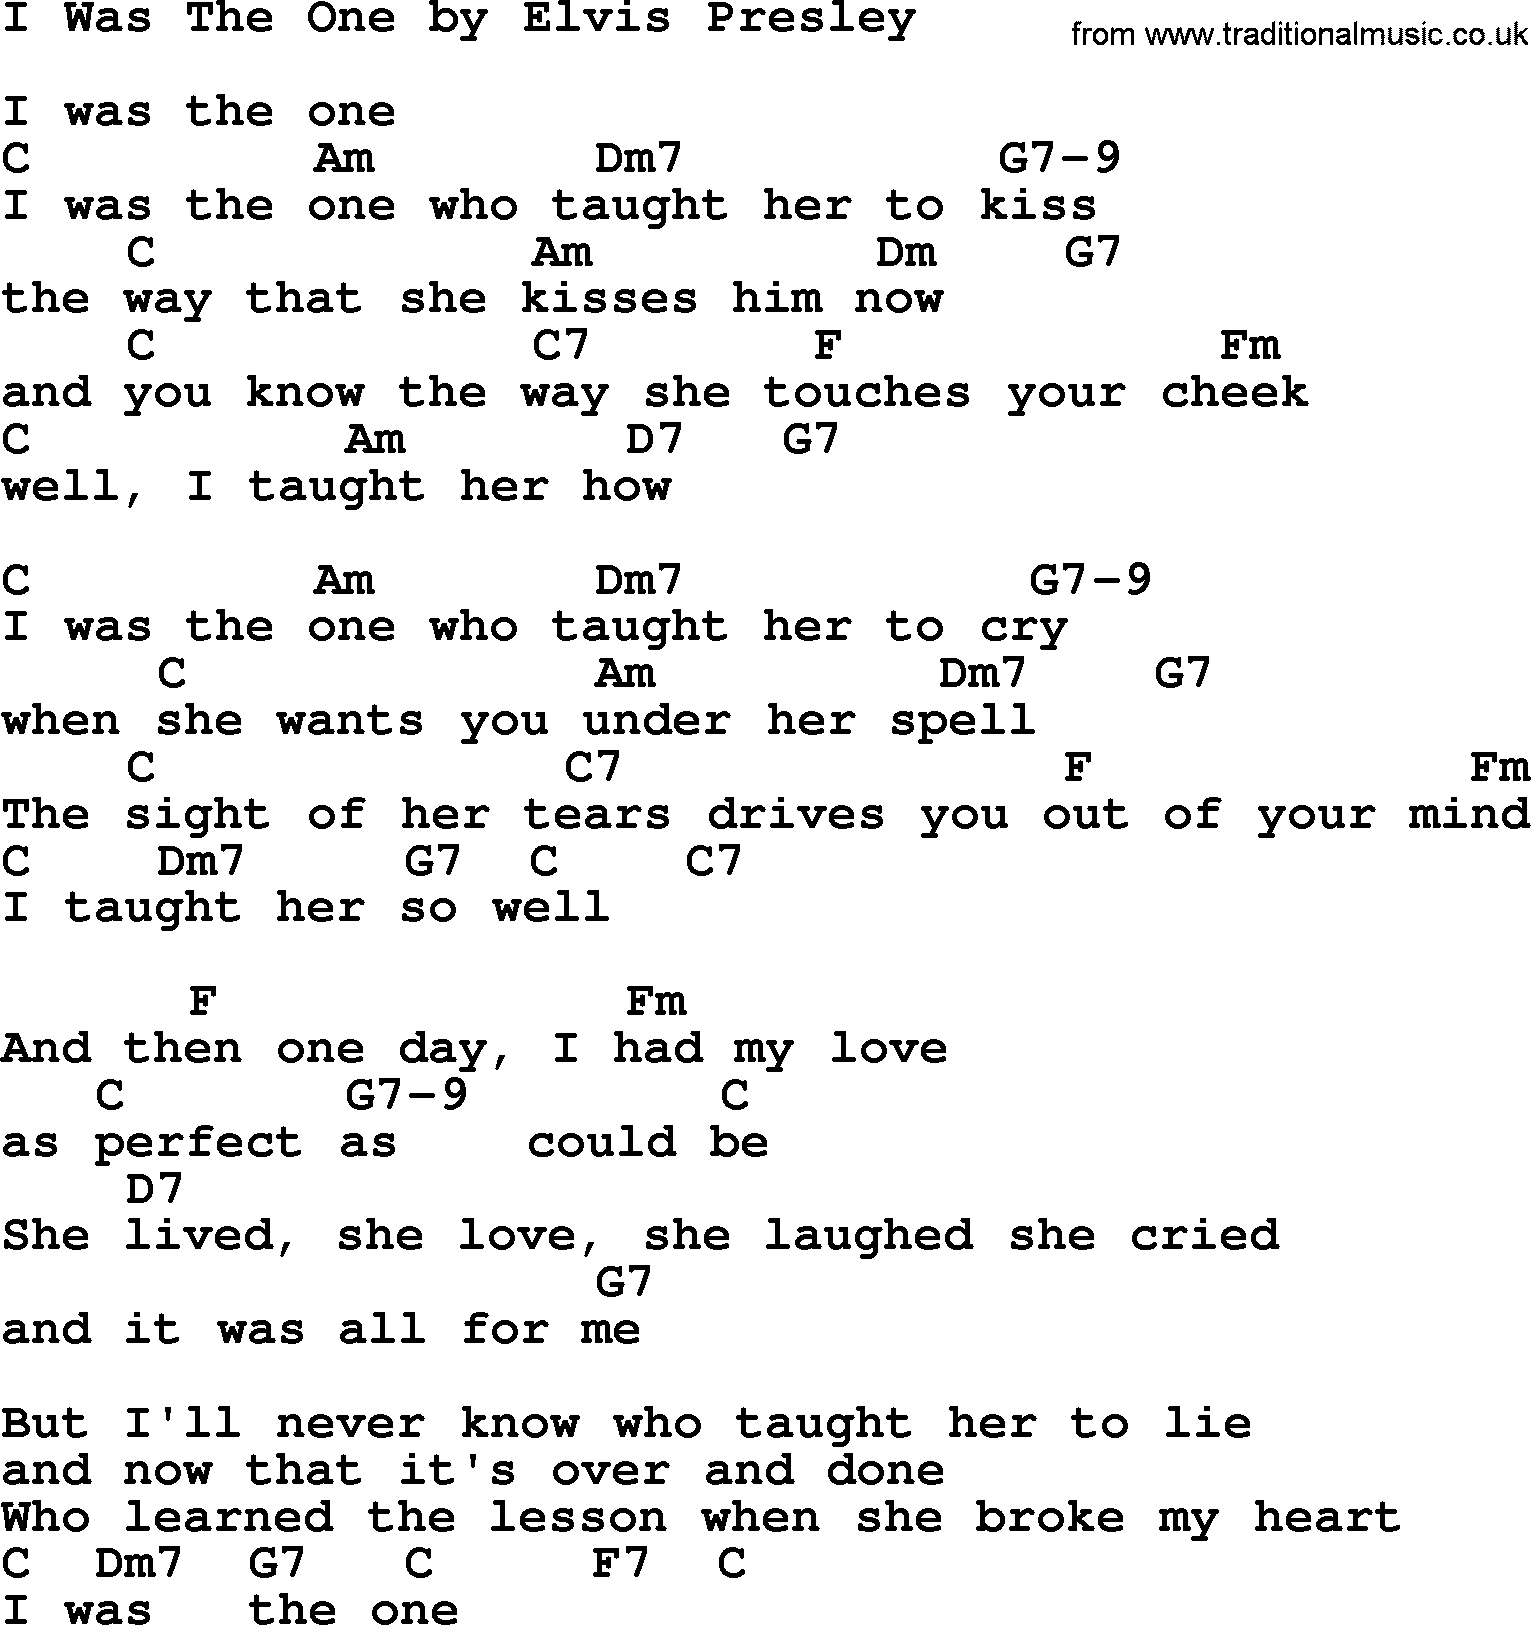 Elvis Presley song: I Was The One, lyrics and chords